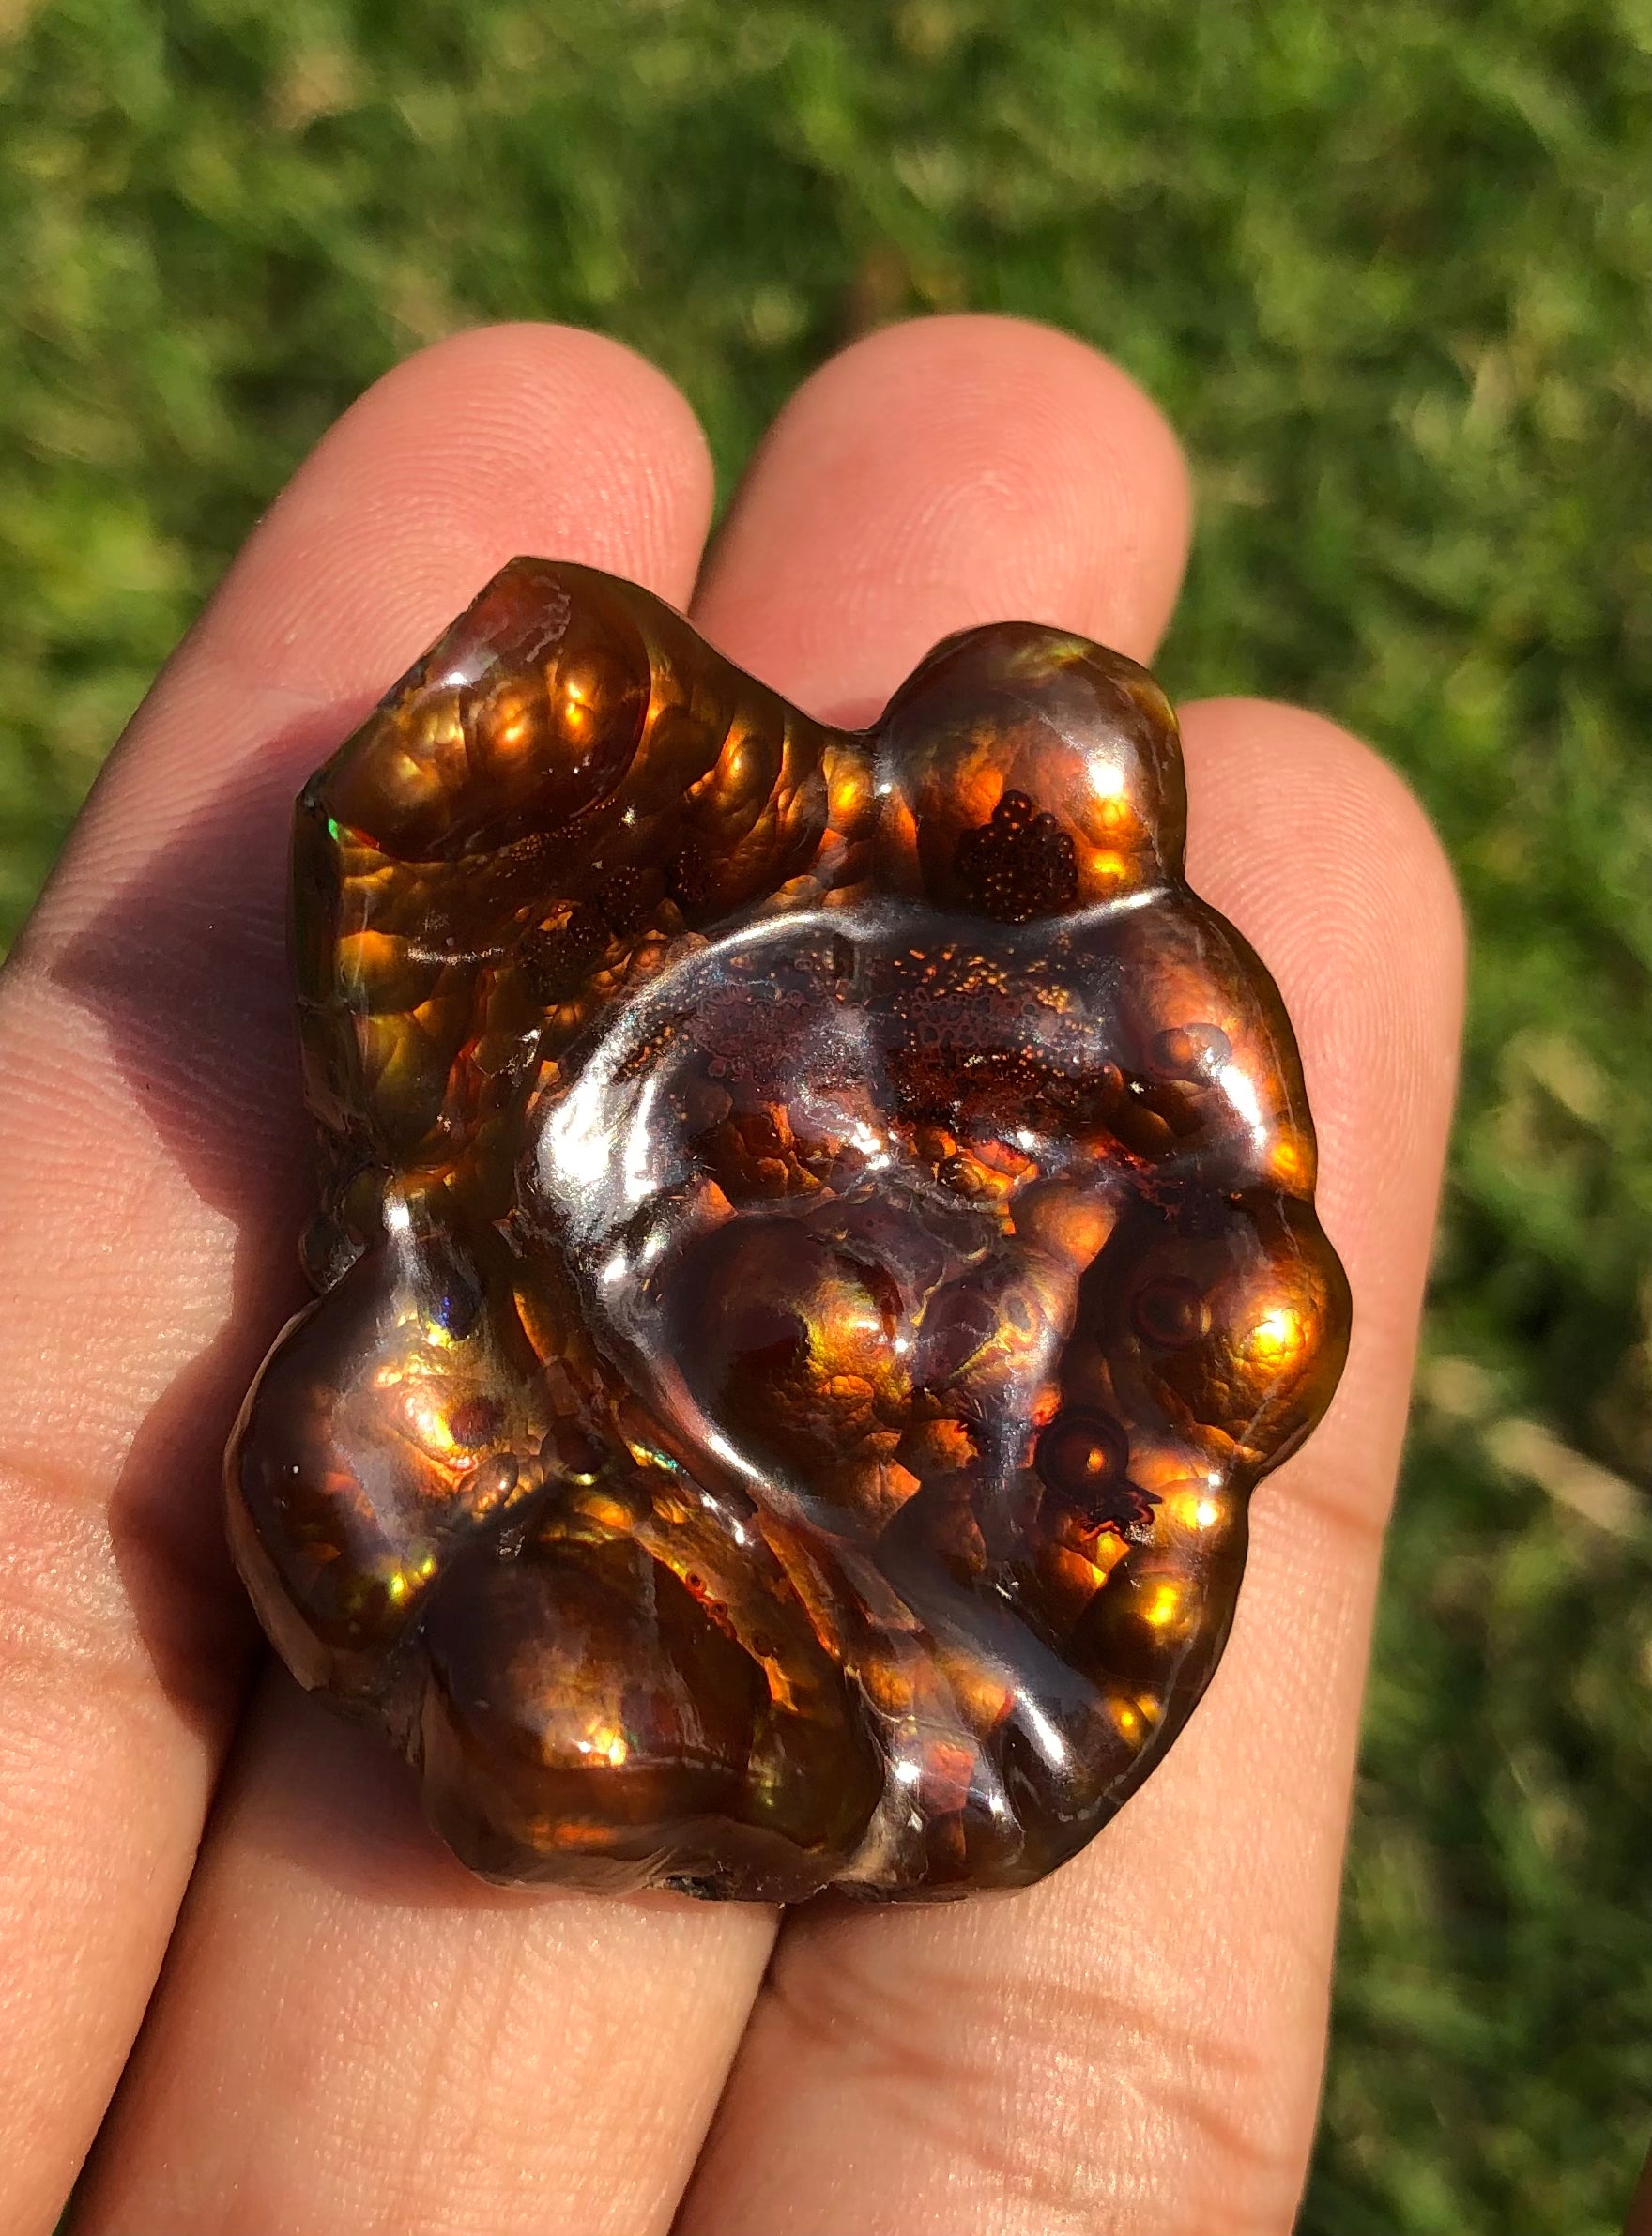 95ct Big Size Rare Fire Agate Carving - Collector Gemstone